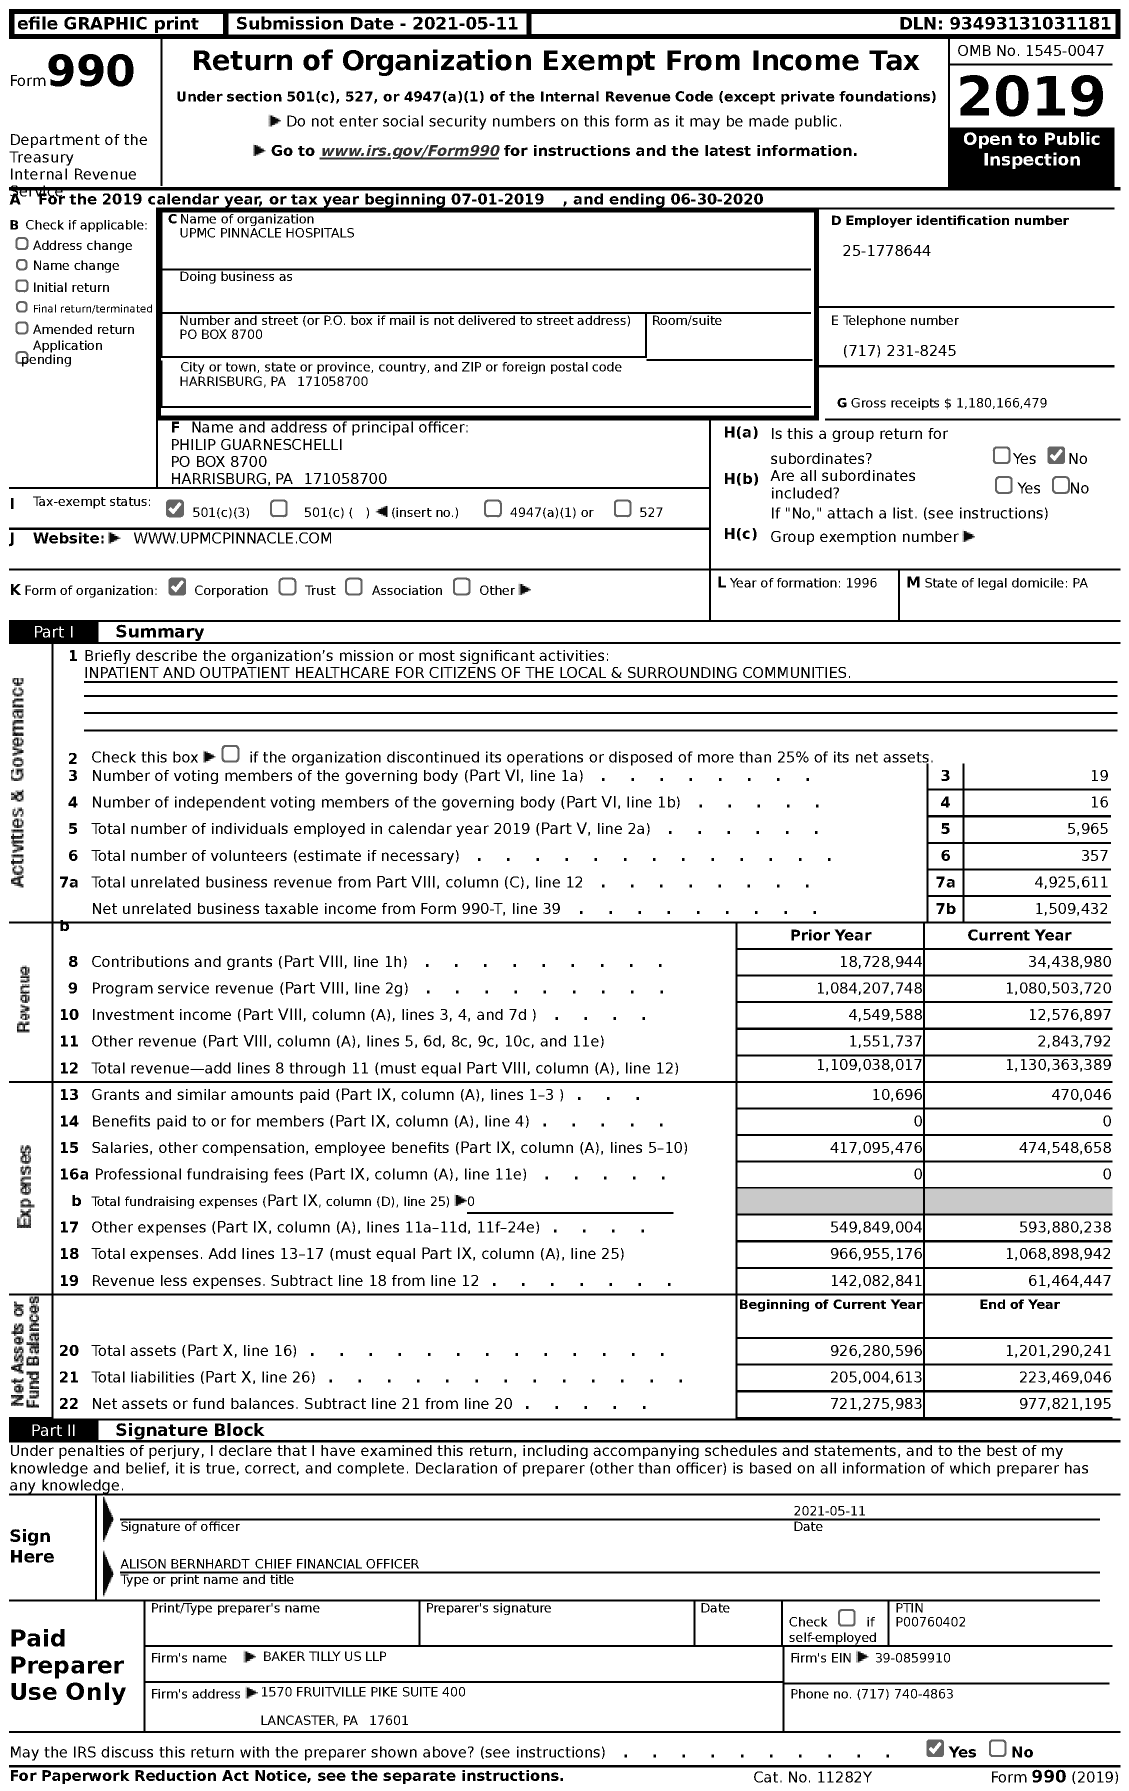 Image of first page of 2019 Form 990 for Upmc Pinnacle Hospitals